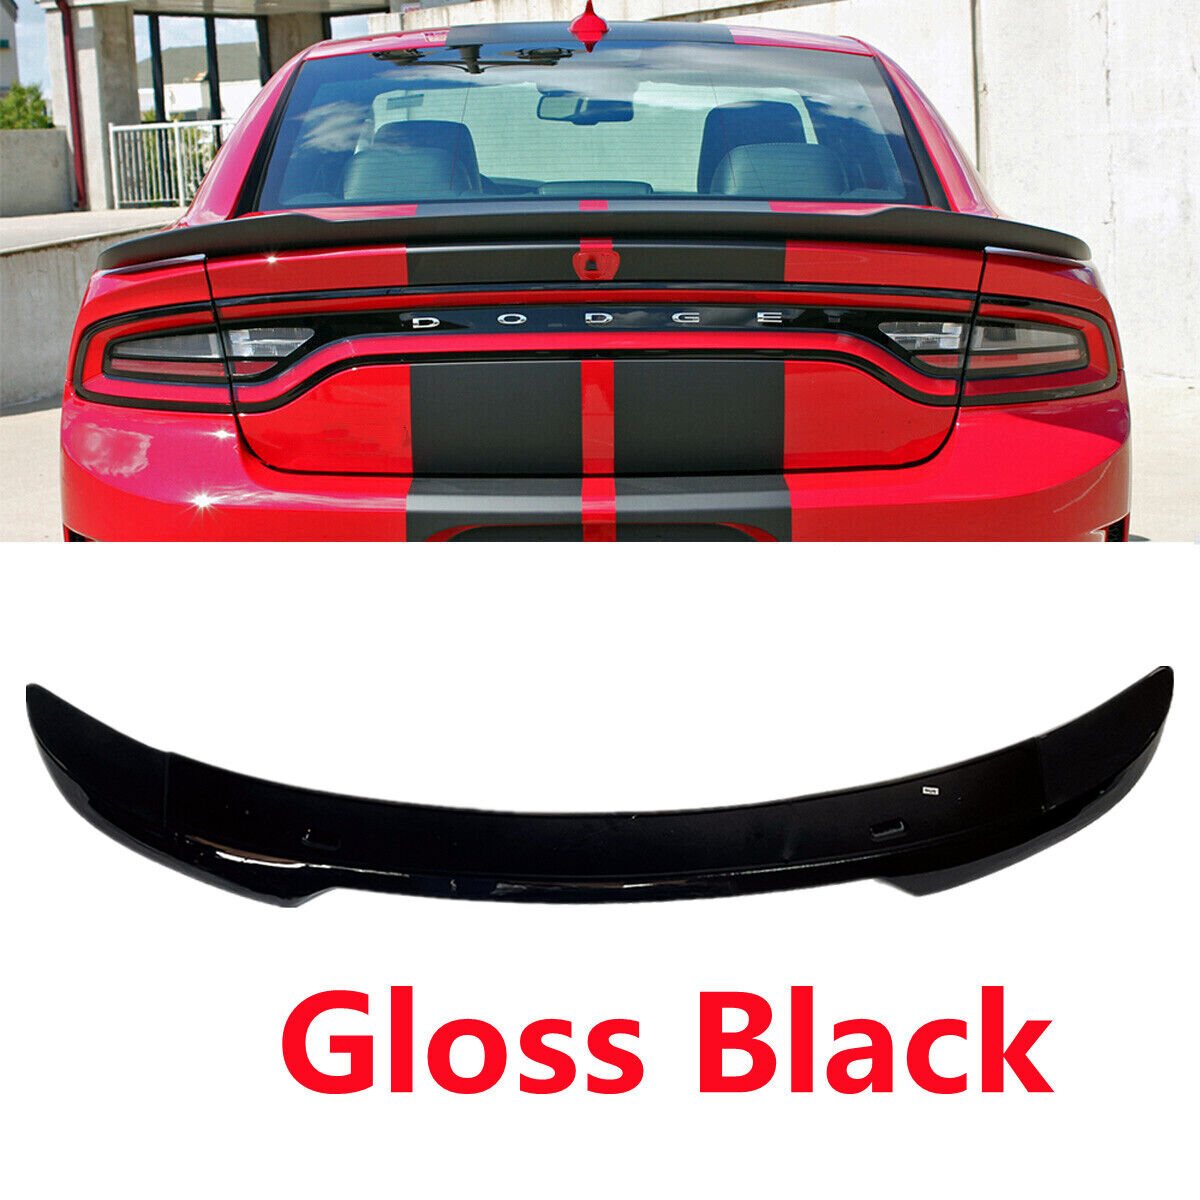 Glossy Black For 2011-18 Dodge Charger SRT Hellcat Style Rear Trunk Spoiler Wing